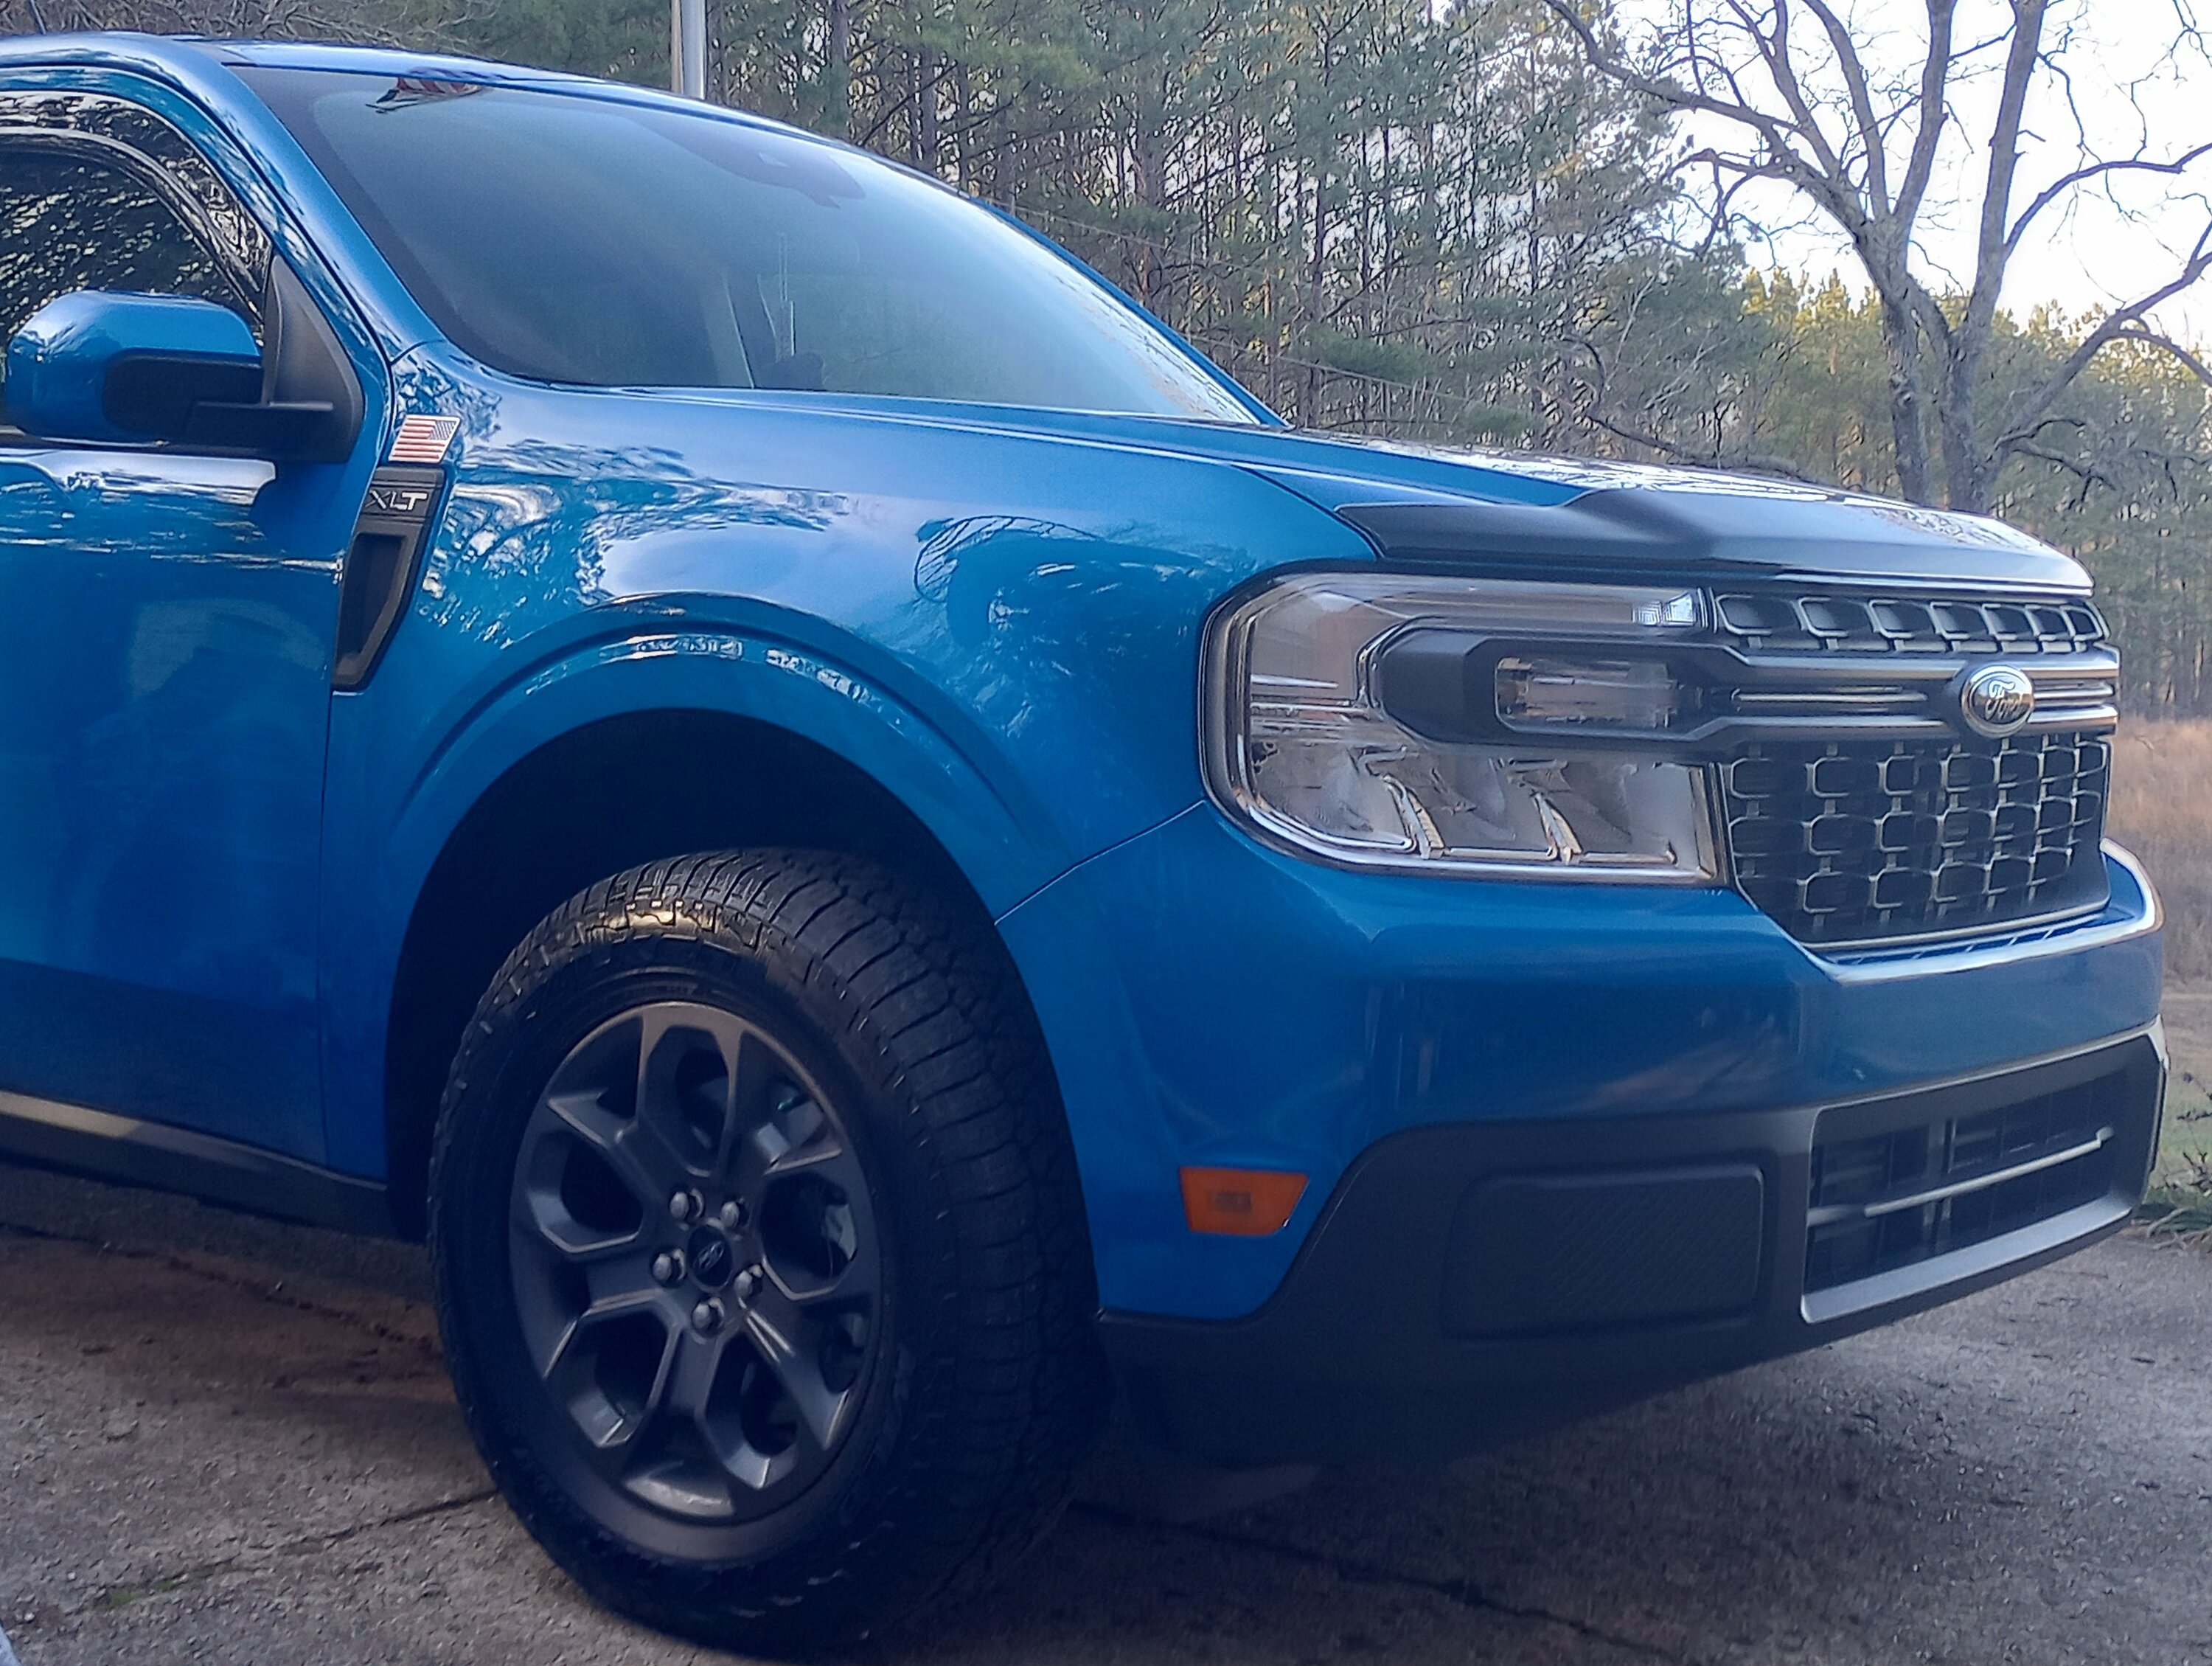 Clay bar and Turtle Wax graphene flex wax results  MaverickTruckClub -  2022+ Ford Maverick Pickup Forum, News, Owners, Discussions